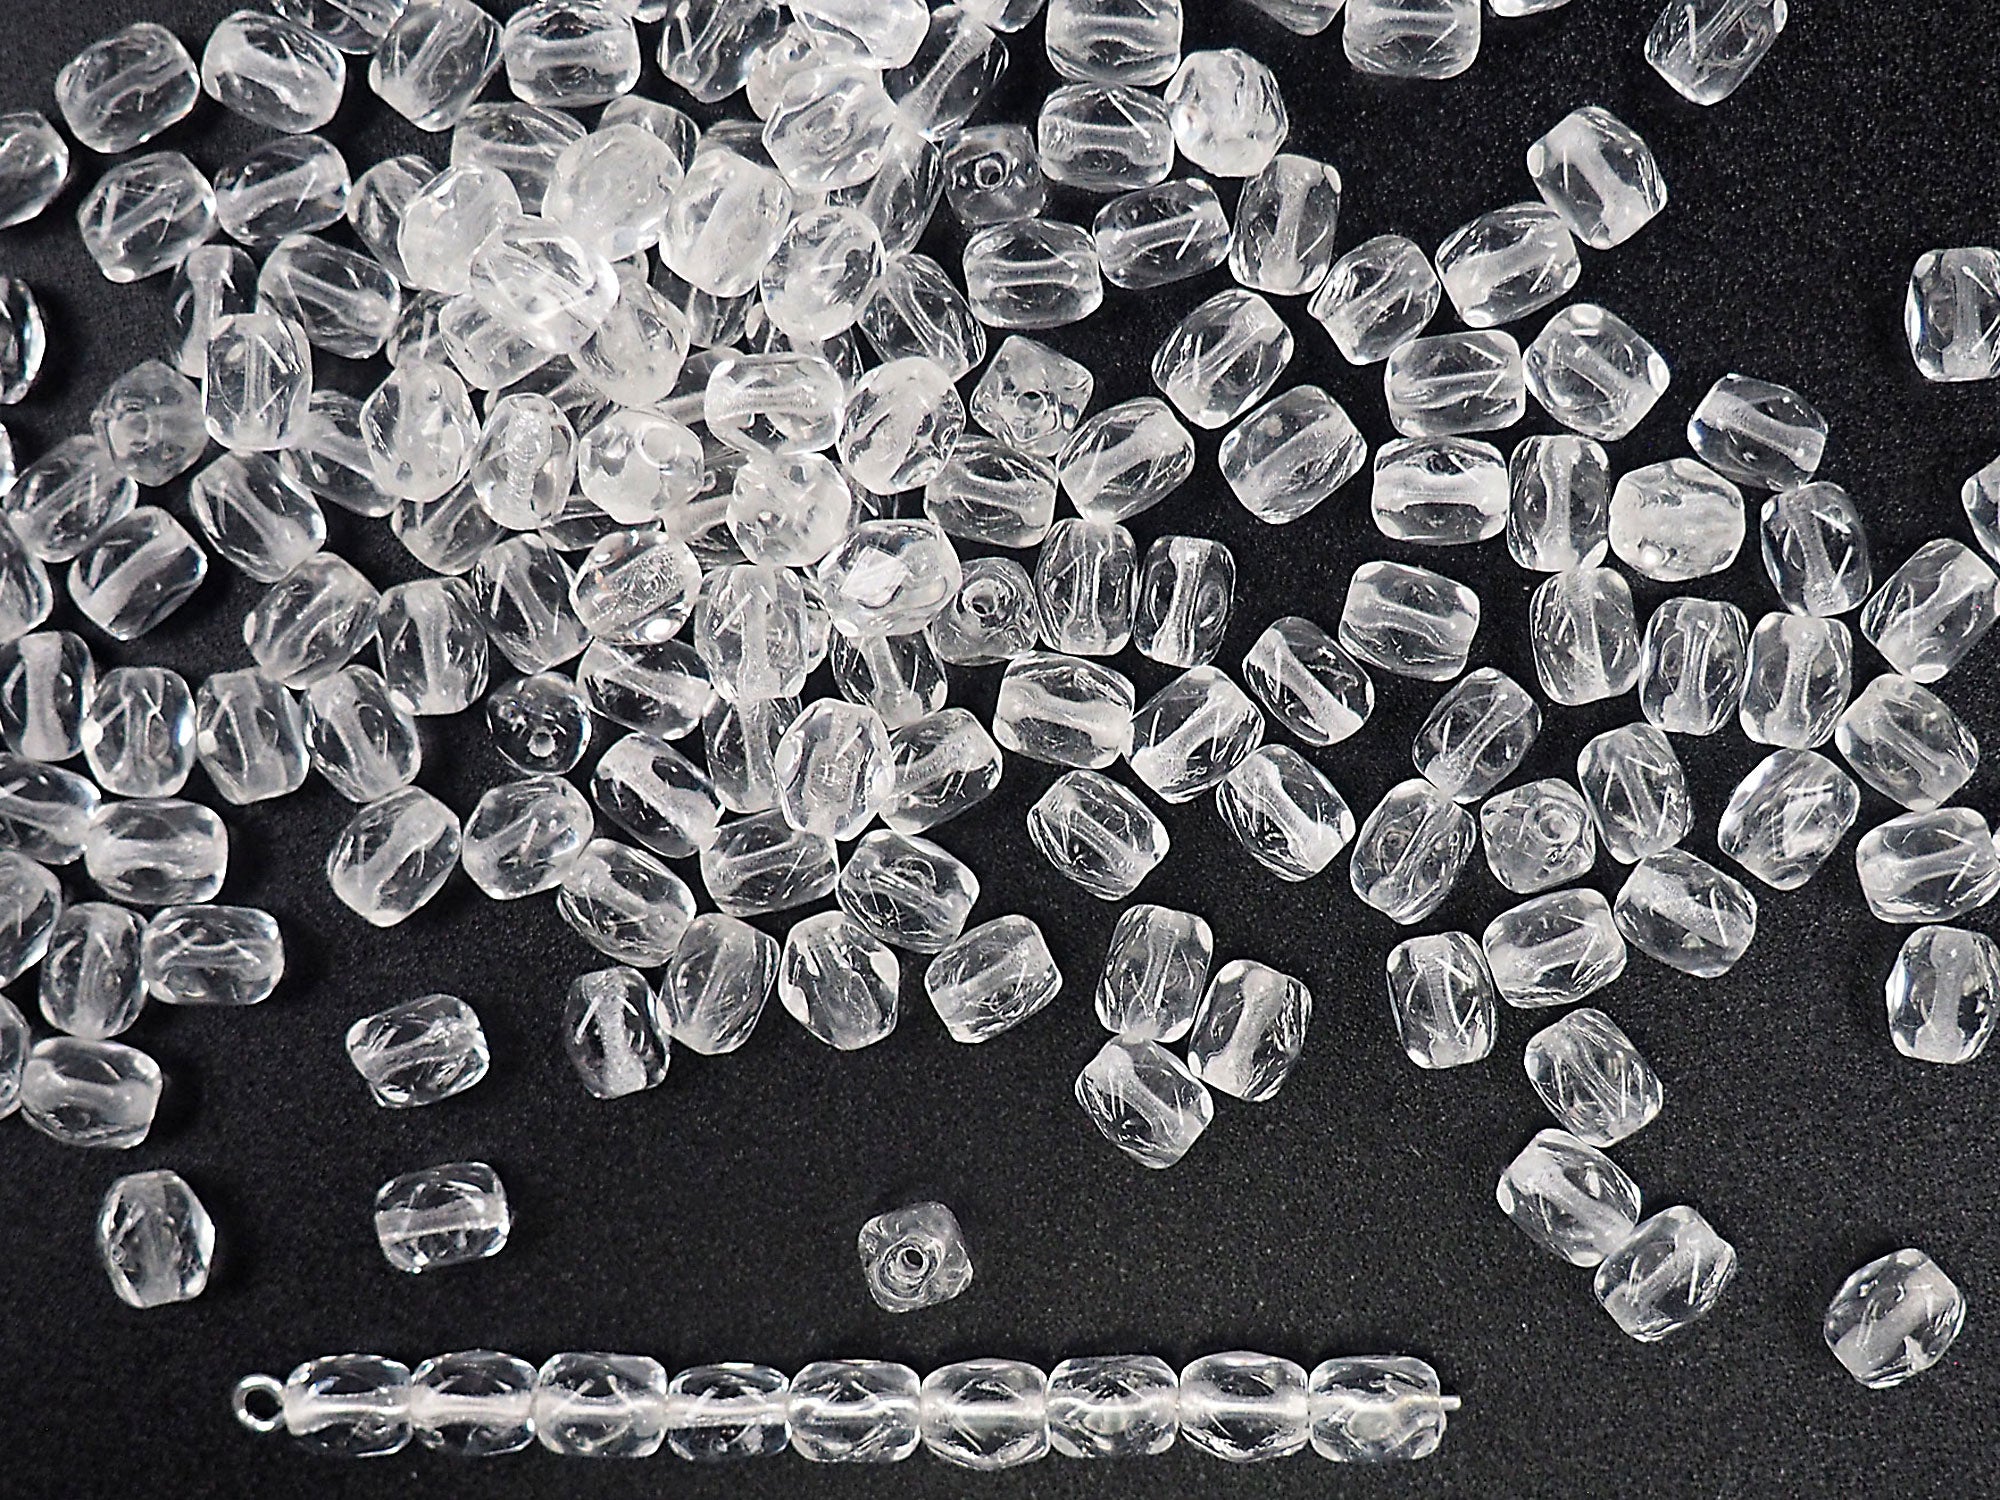 Czech Glass Druk Beads in size 6x5mm, Faceted, Clear Crystal, 50pcs, P893